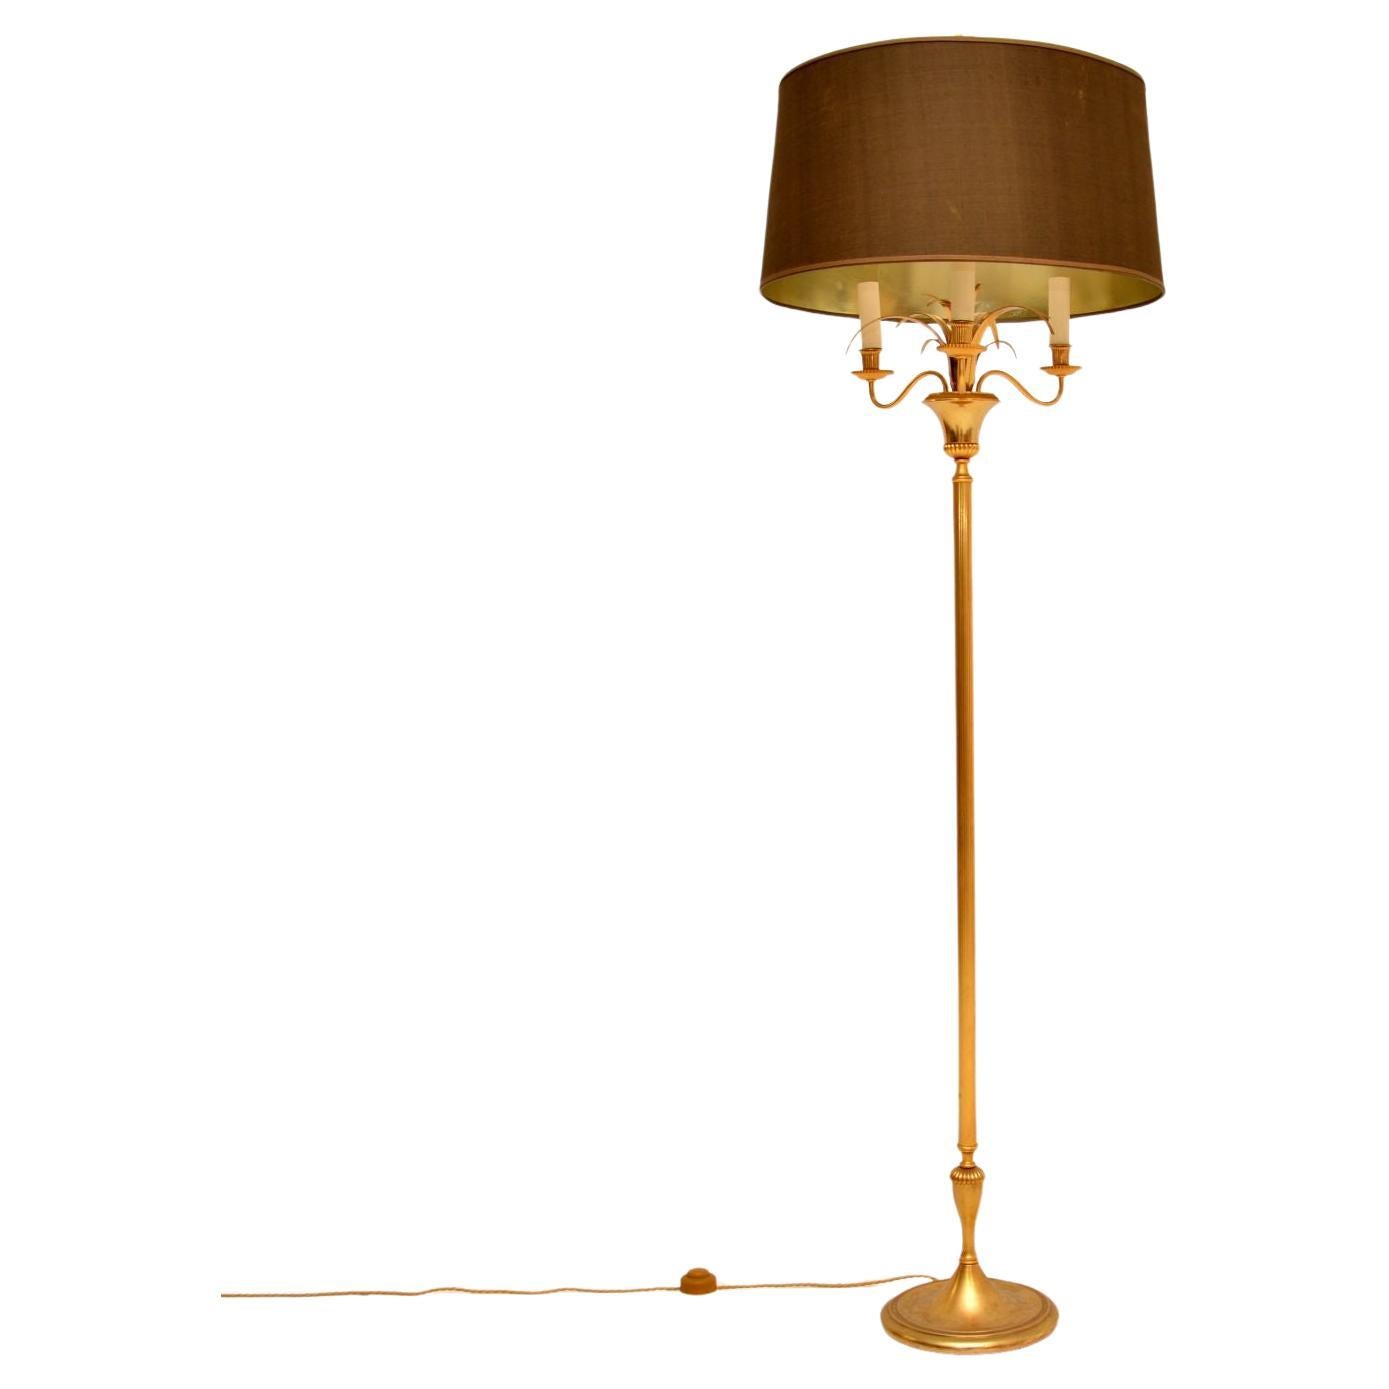 1970s Vintage French Brass Floor Lamp For Sale